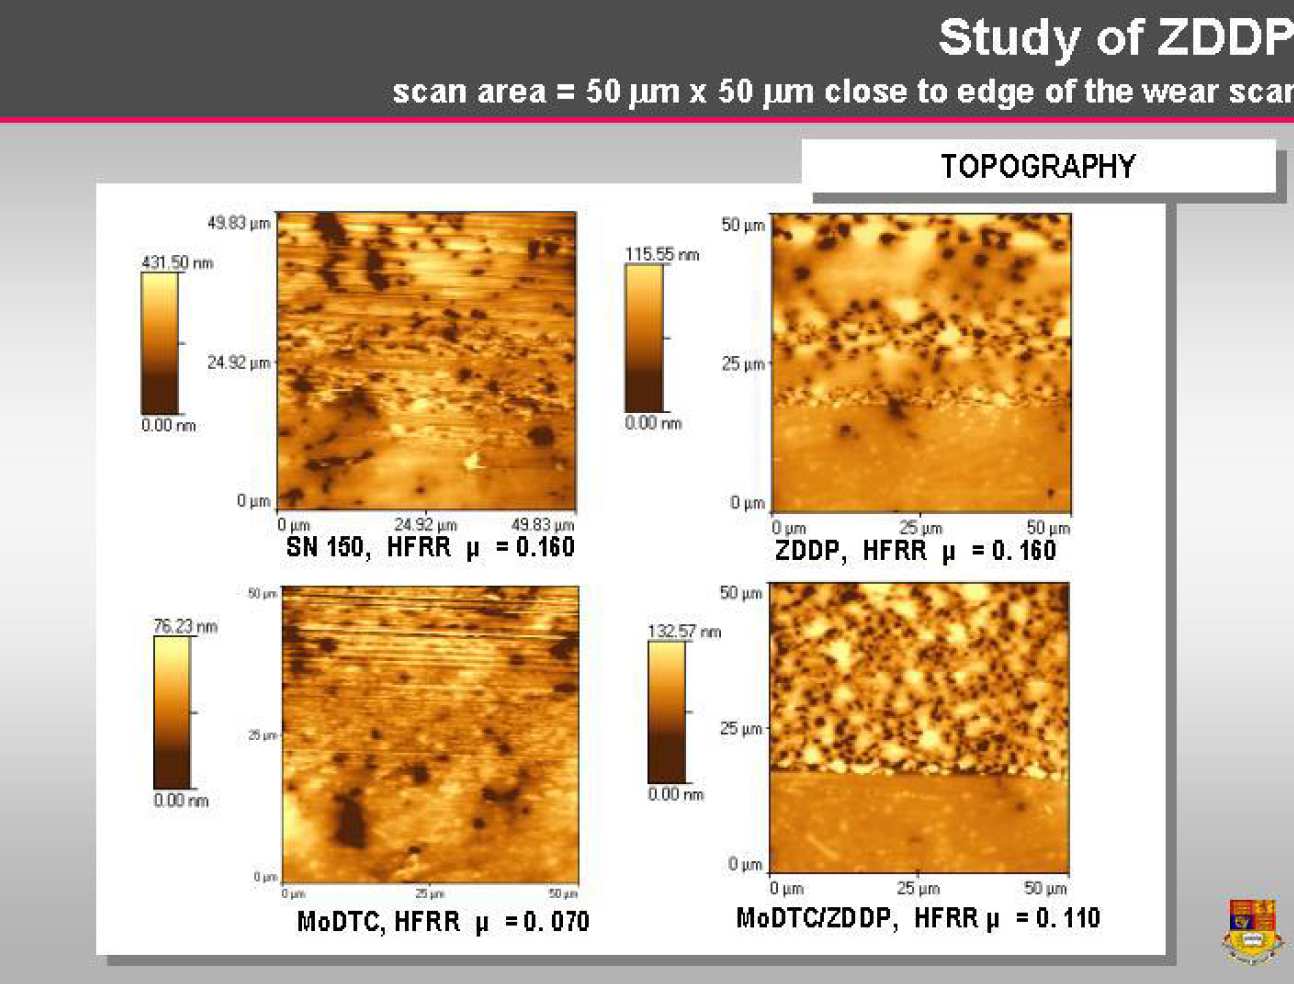 Topography imaging showed the morphology of films formed by different lubricant solutions